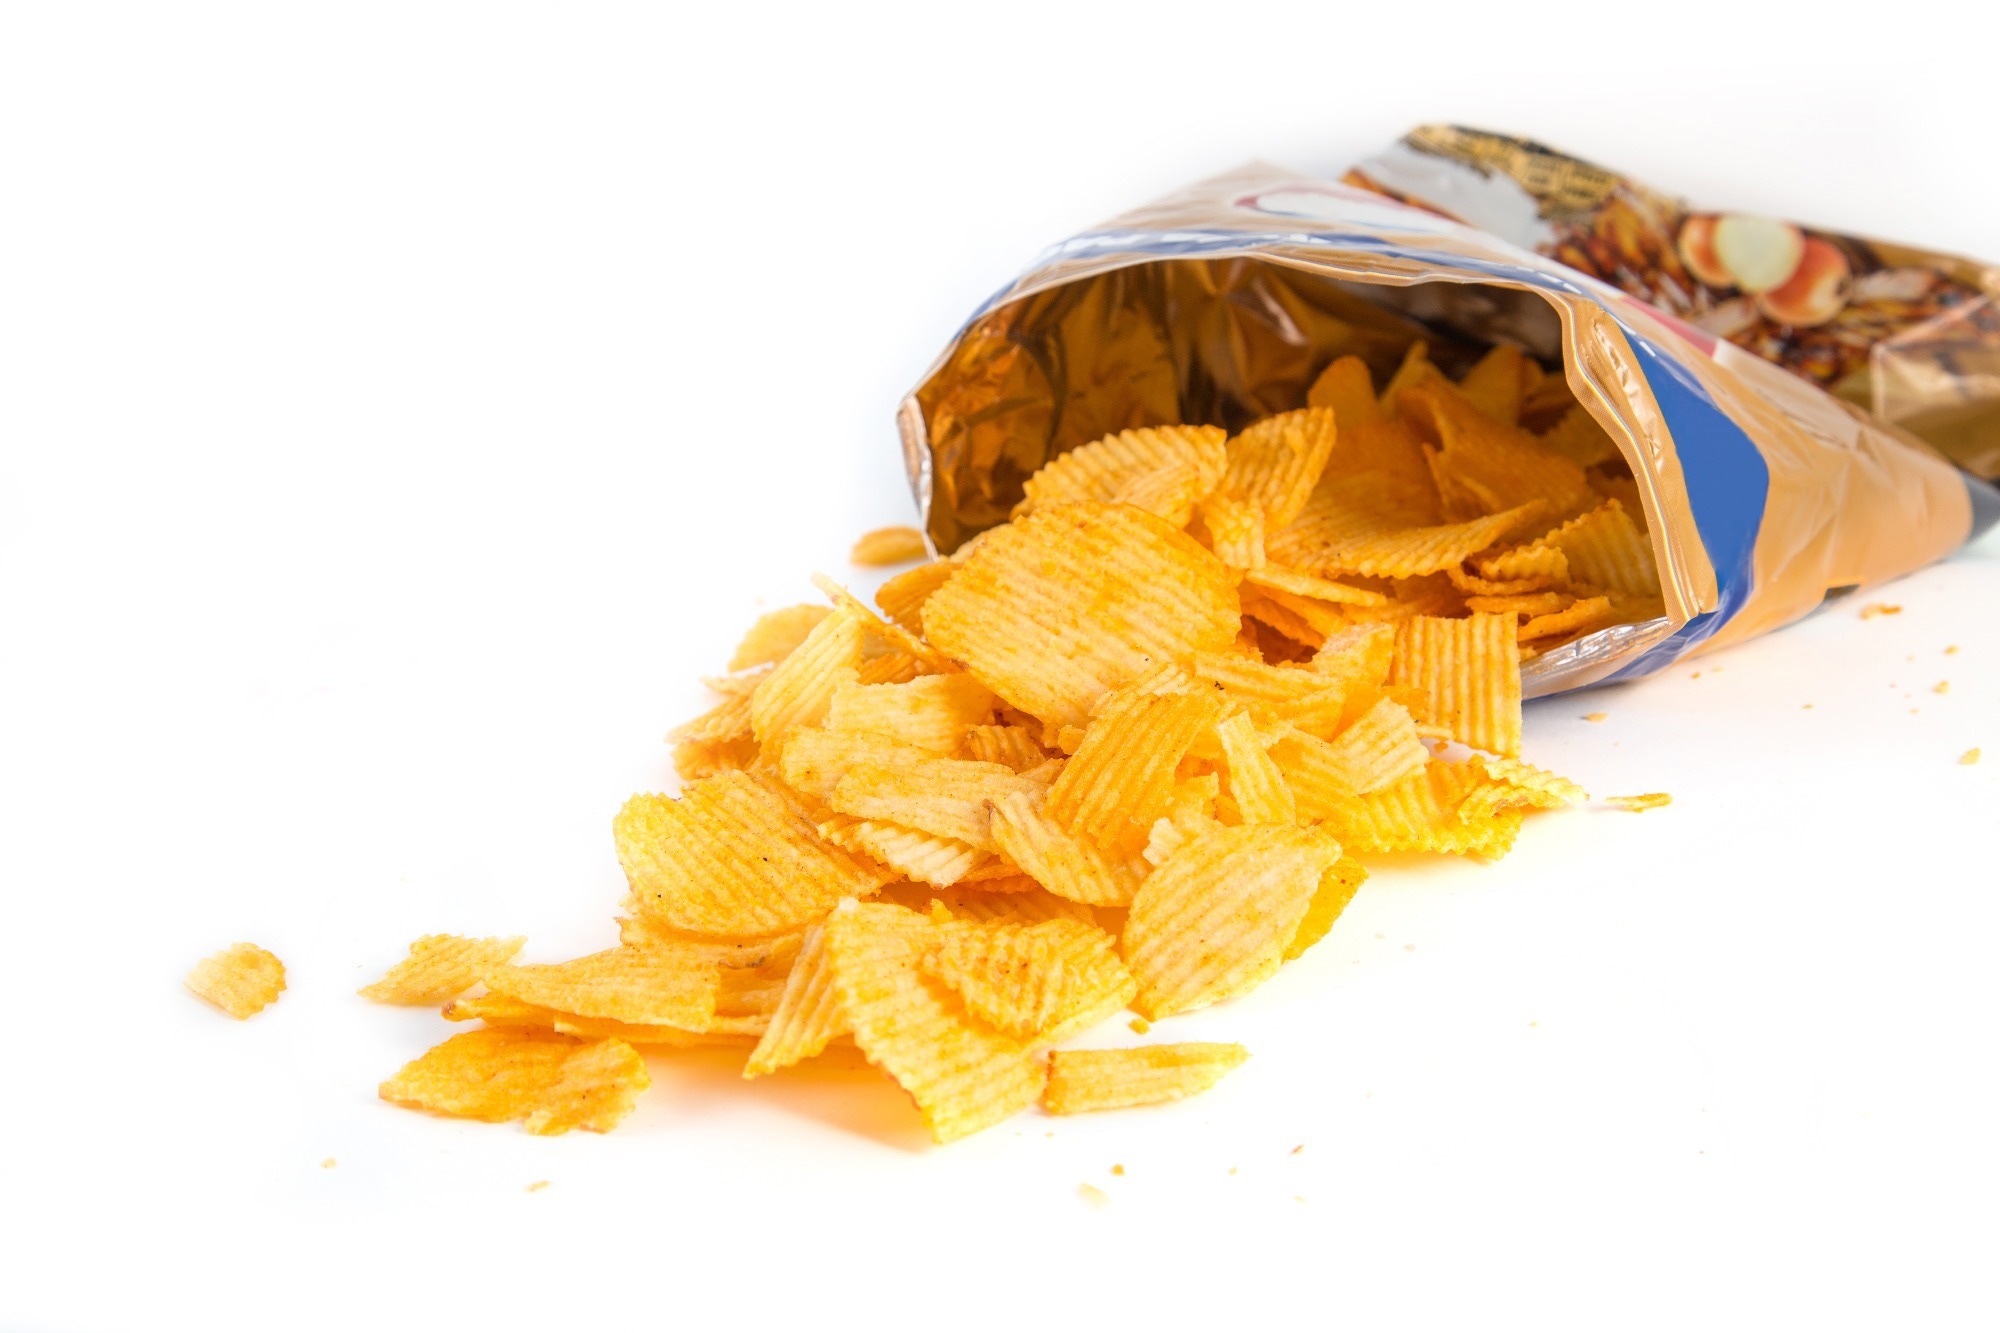 Investigation: Ultraprocessed Foods and Human Health: From Epidemiological Evidence to Mechanistic Insights. Image credit: Dawid Rojek / Shutterstock.com